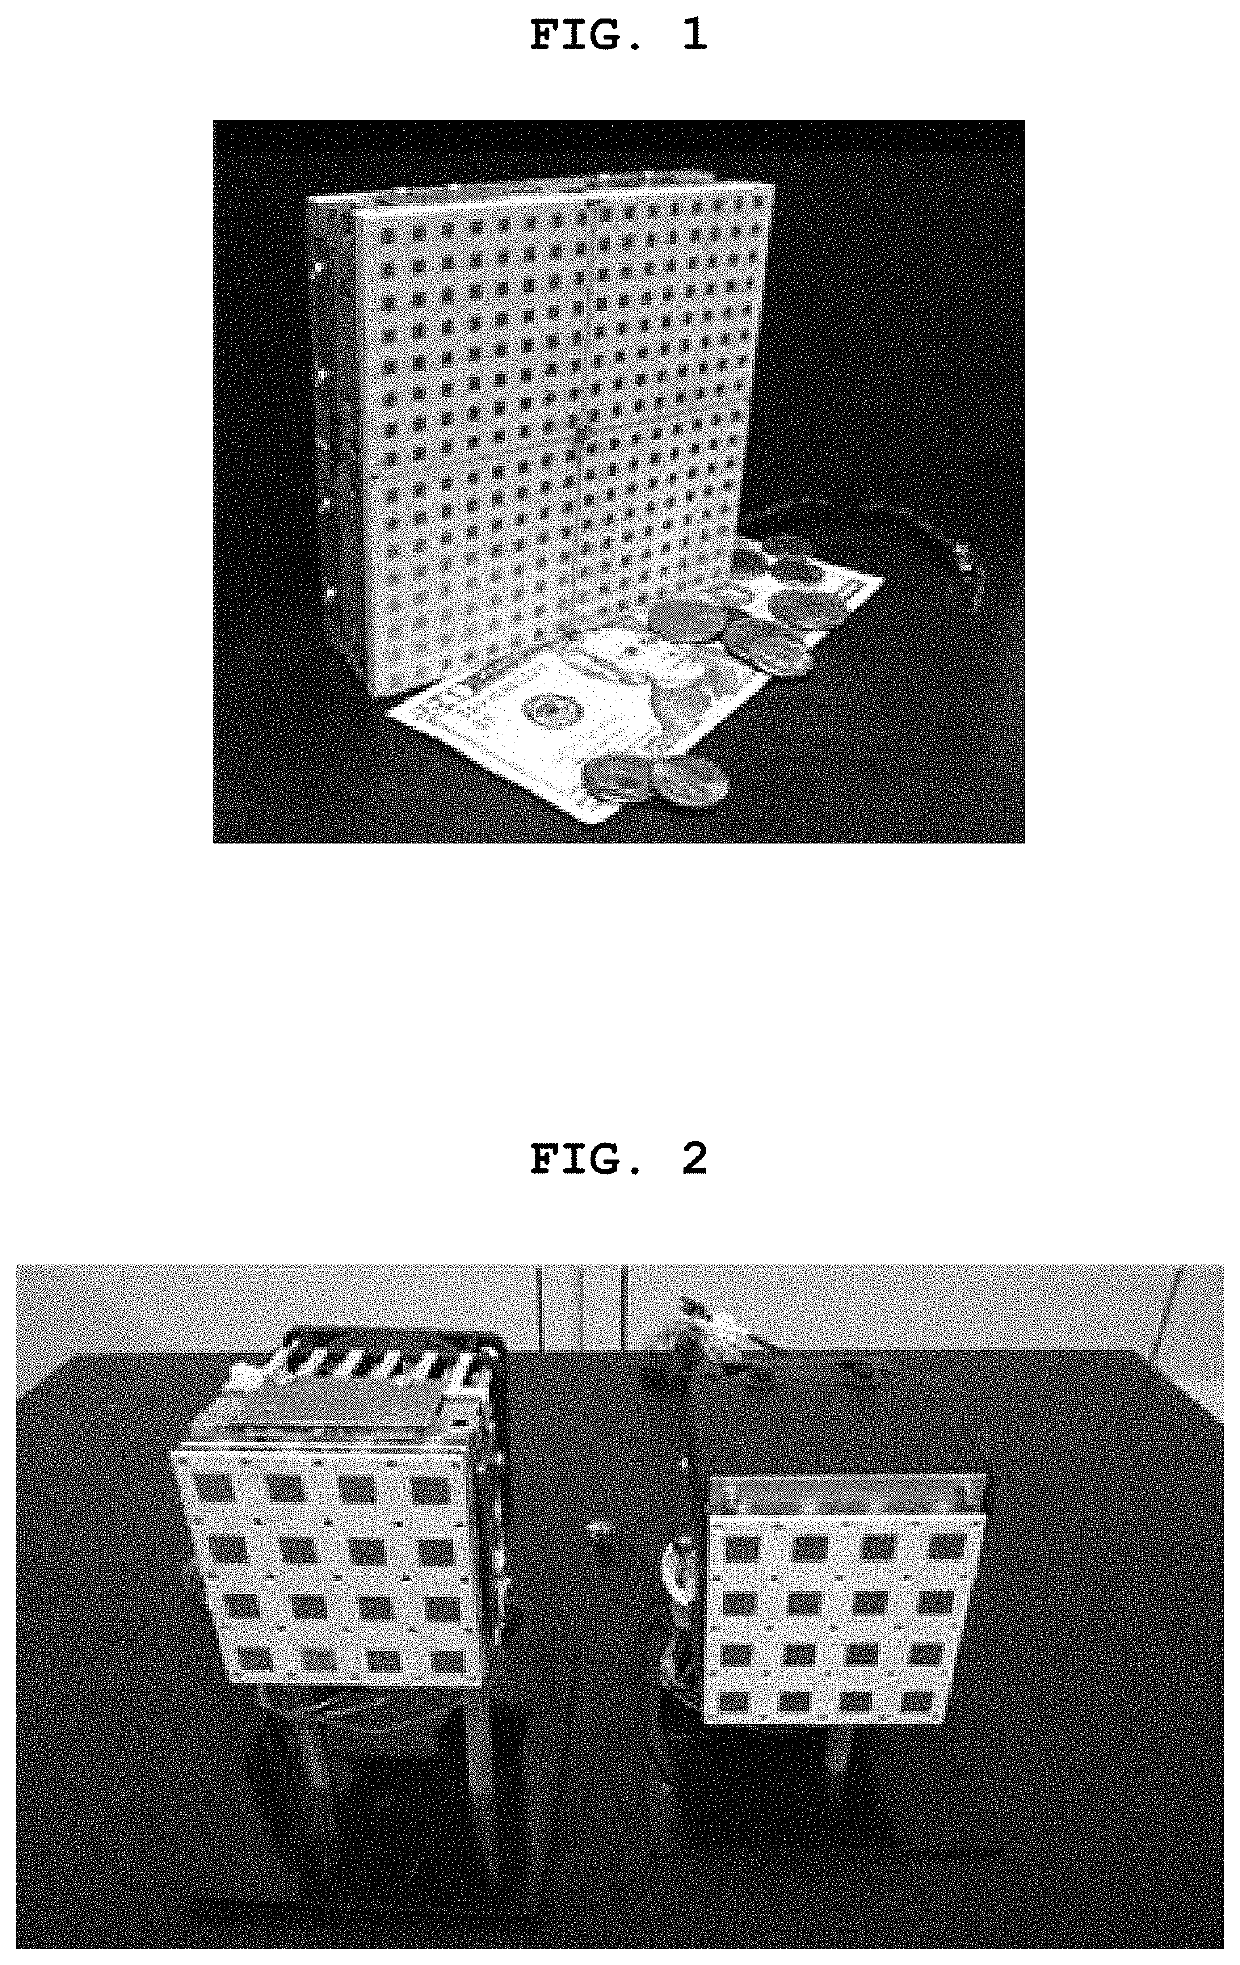 Tile structure of shape-adaptive phased array antenna